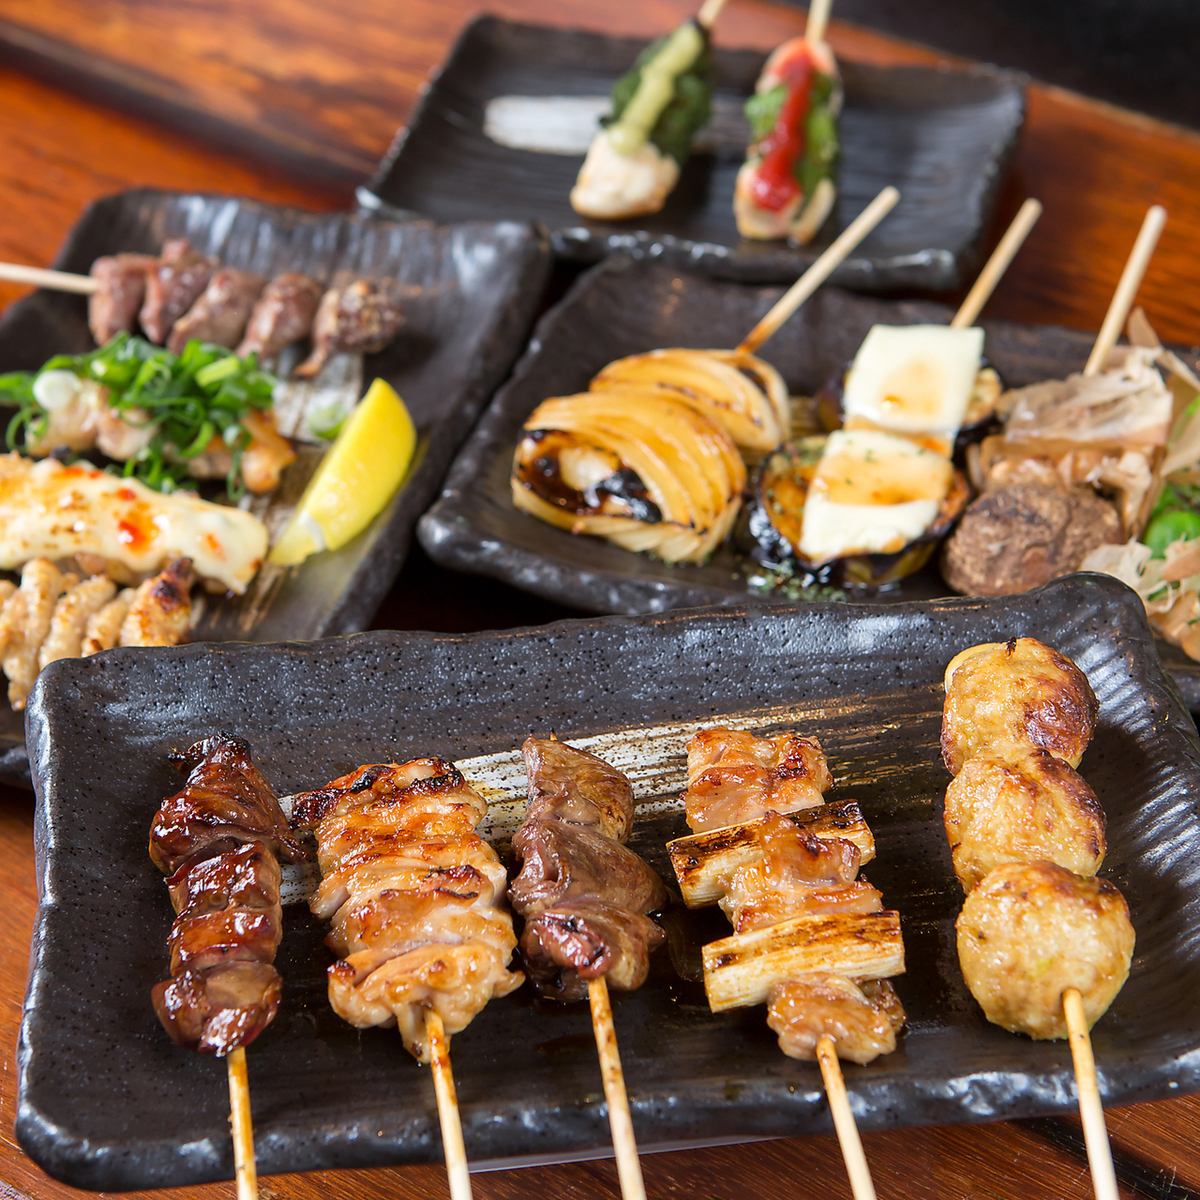 A shop that responds to the needs of customers as much as possible! Over 30 types of yakitori!